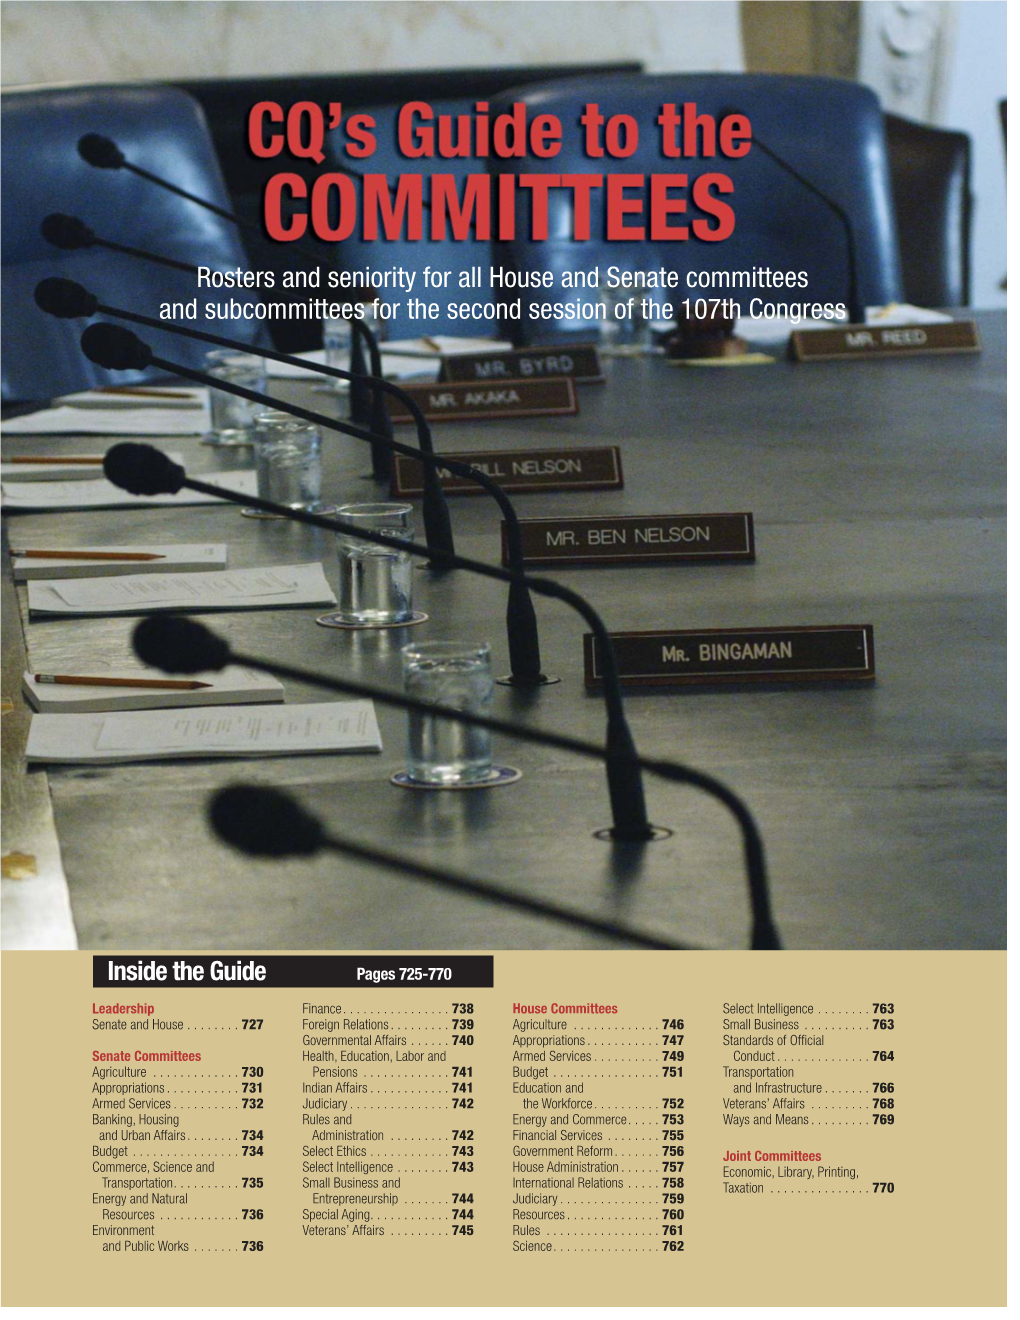 CQ's Guide to the Committees